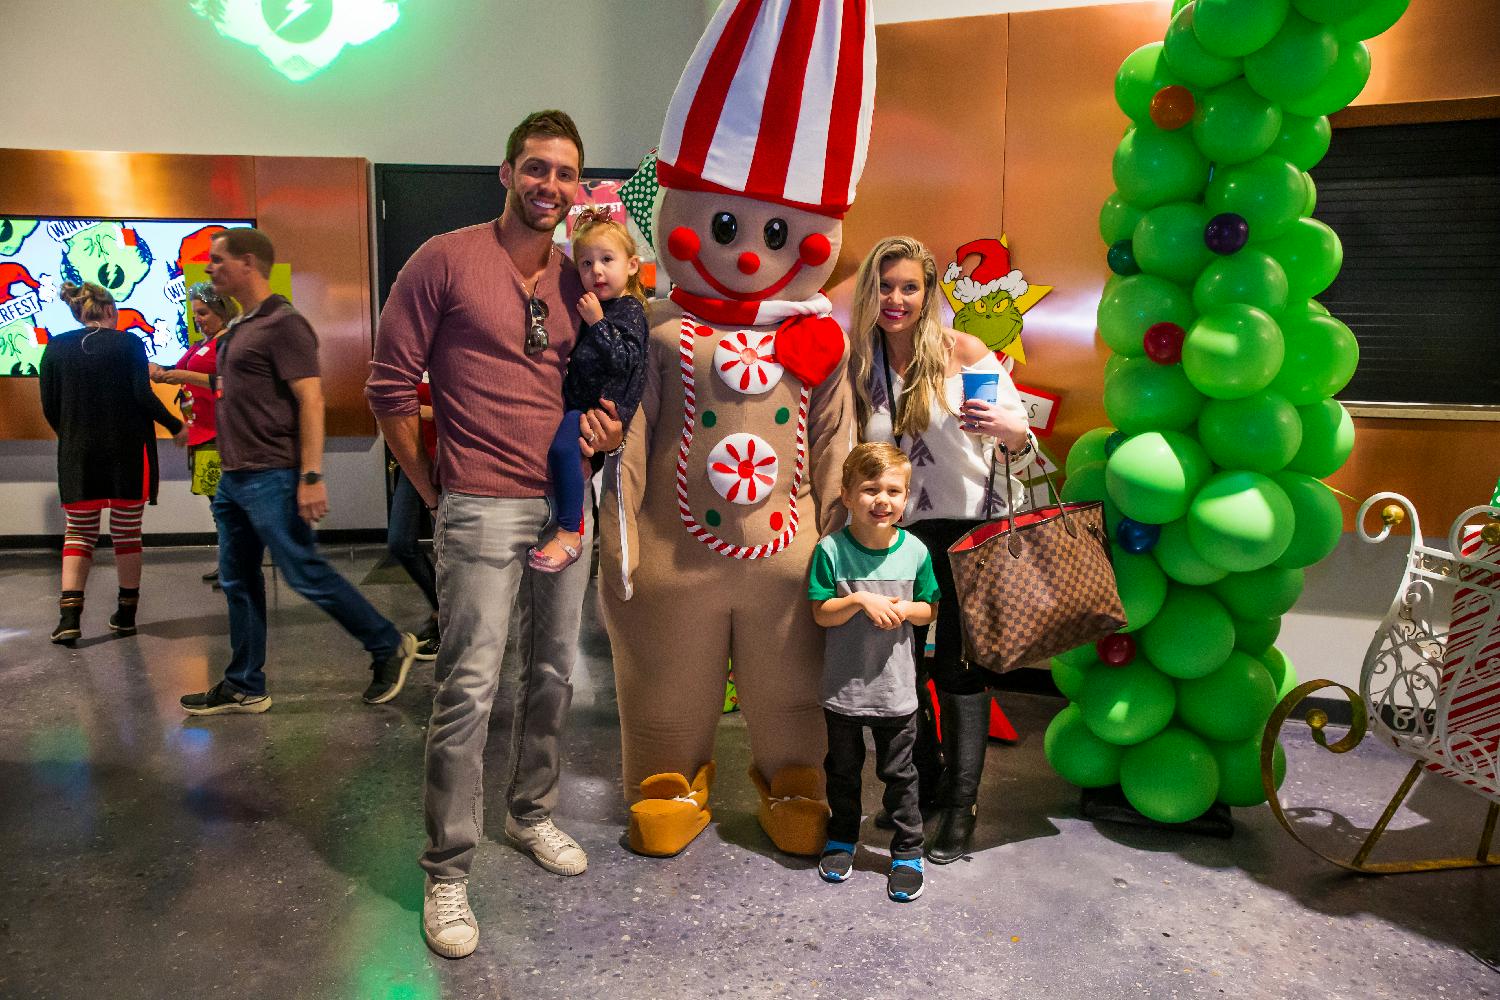 Our 2019 family-focused Winterfest event featured an ice skating rink, snow sledding, and more to Florida! 